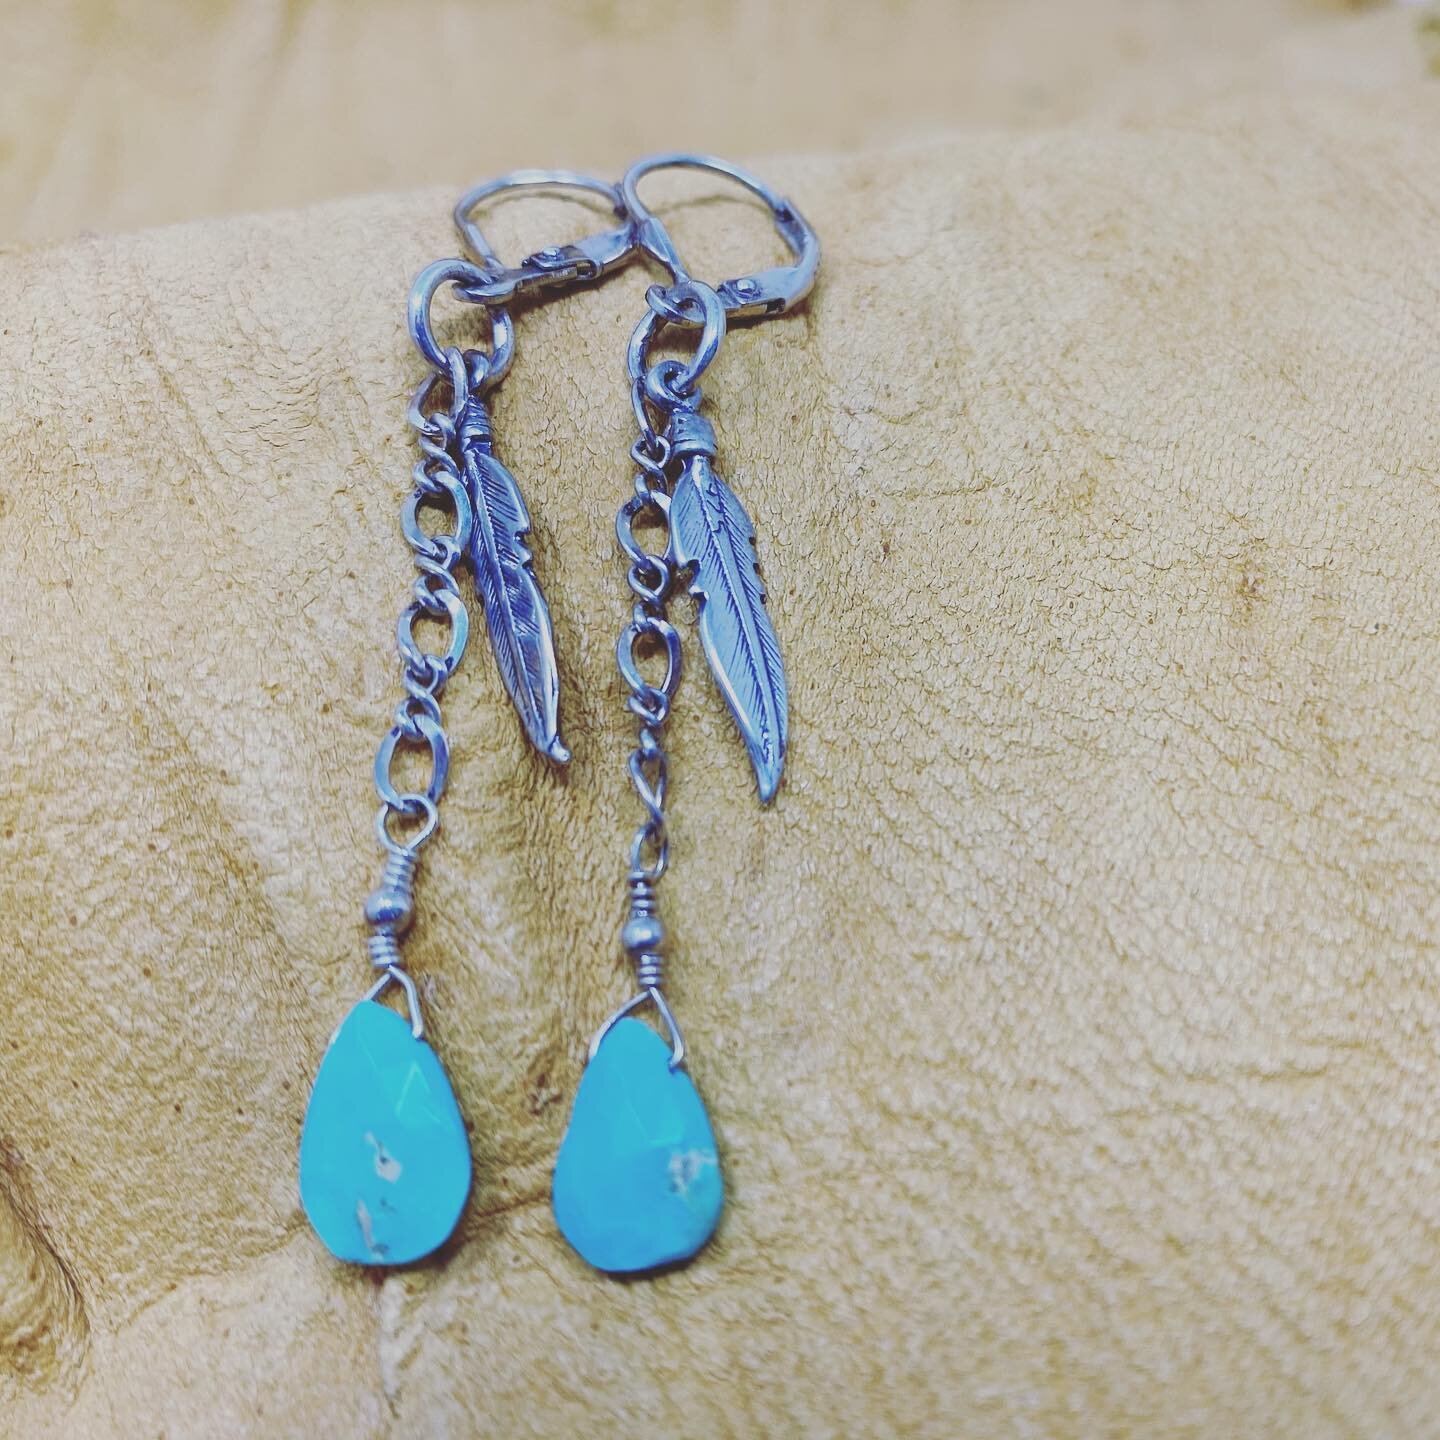 Bringing more beauties to my store in Jackson. Where would we be without turquoise?@nativejacksonhole